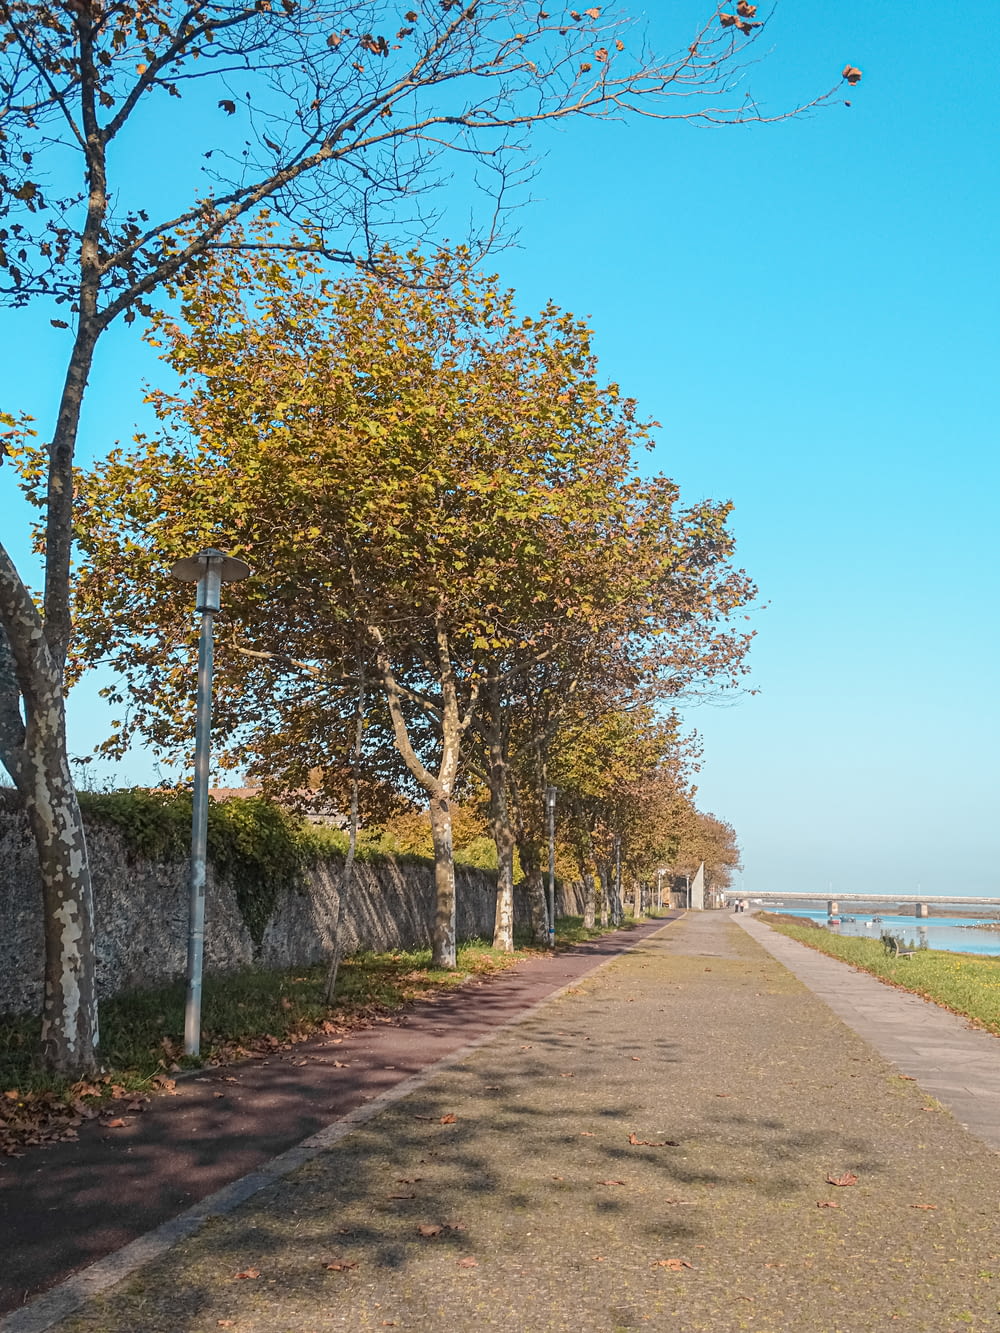 a tree lined street next to a body of water